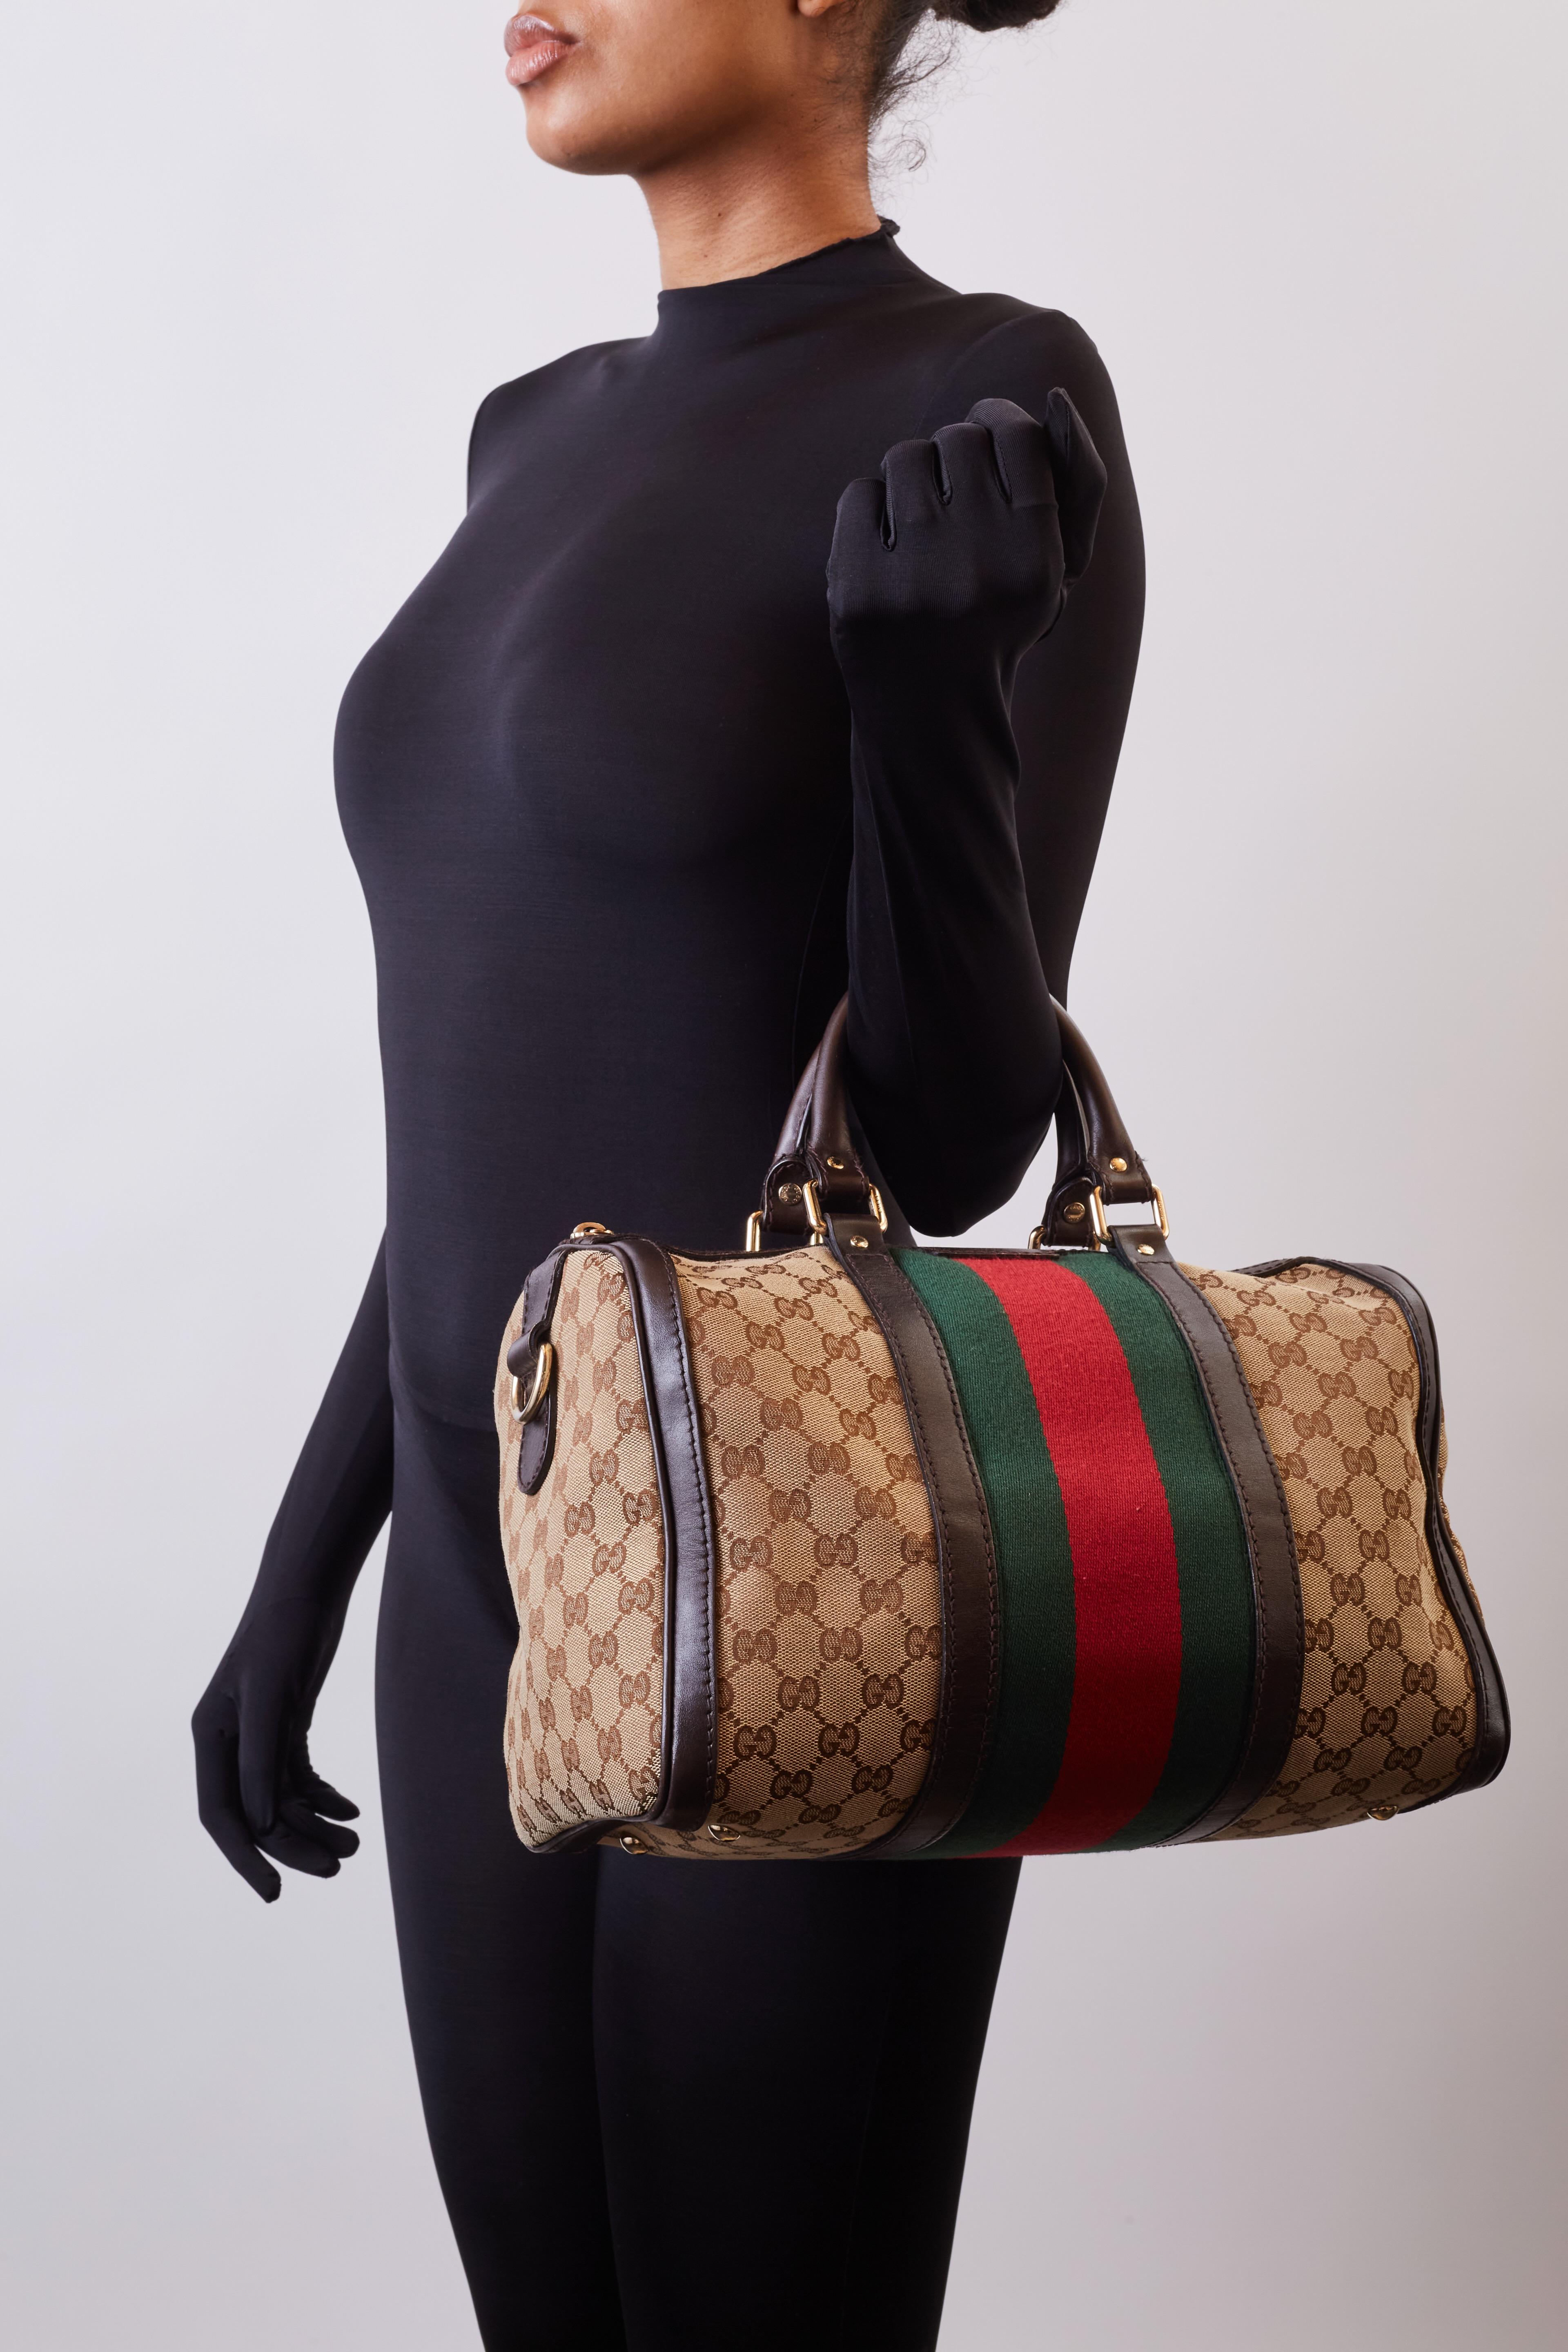 This vintage style Boston bag is made of Gucci GG monogram canvas. The bag features dark ebony leather finishes throughout including dual rolled leather top handles, trim, details and an optional shoulder strap. The bag also features a central green